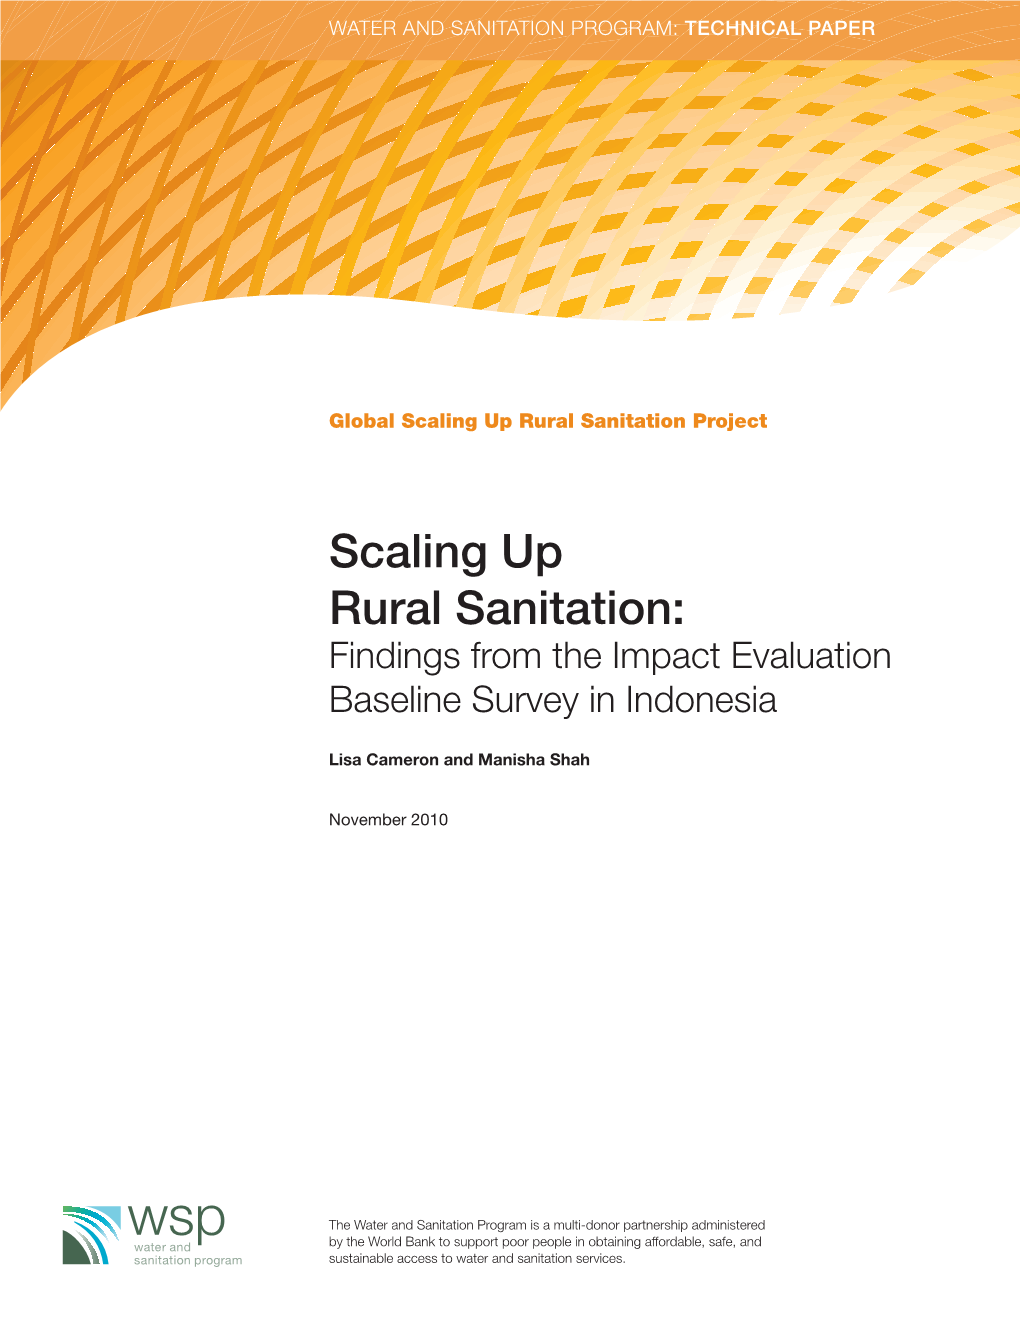 Scaling up Rural Sanitation: Findings from the Impact Evaluation Baseline Survey in Indonesia